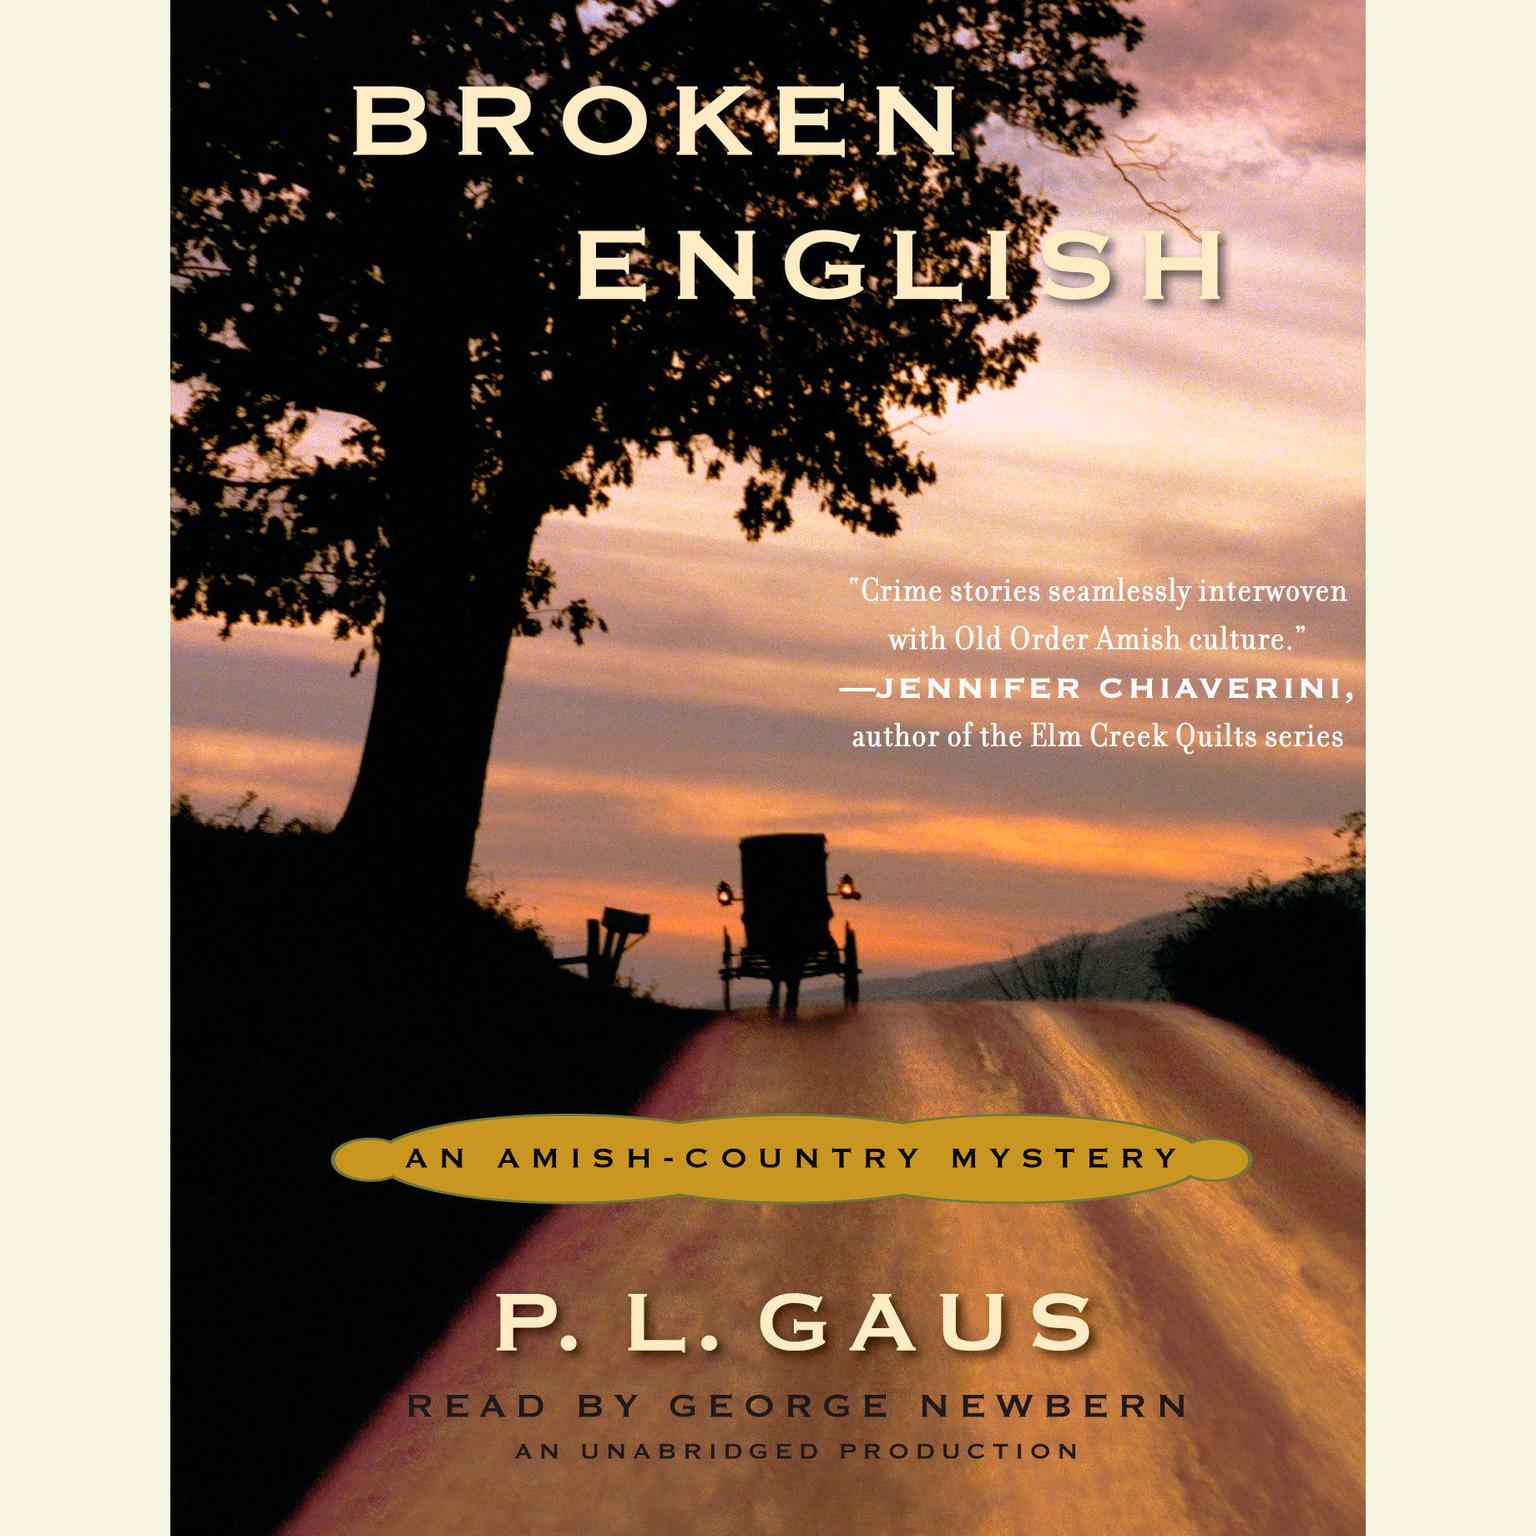 Broken English: An Amish-Country Mystery (#2) Audiobook, by P. L. Gaus